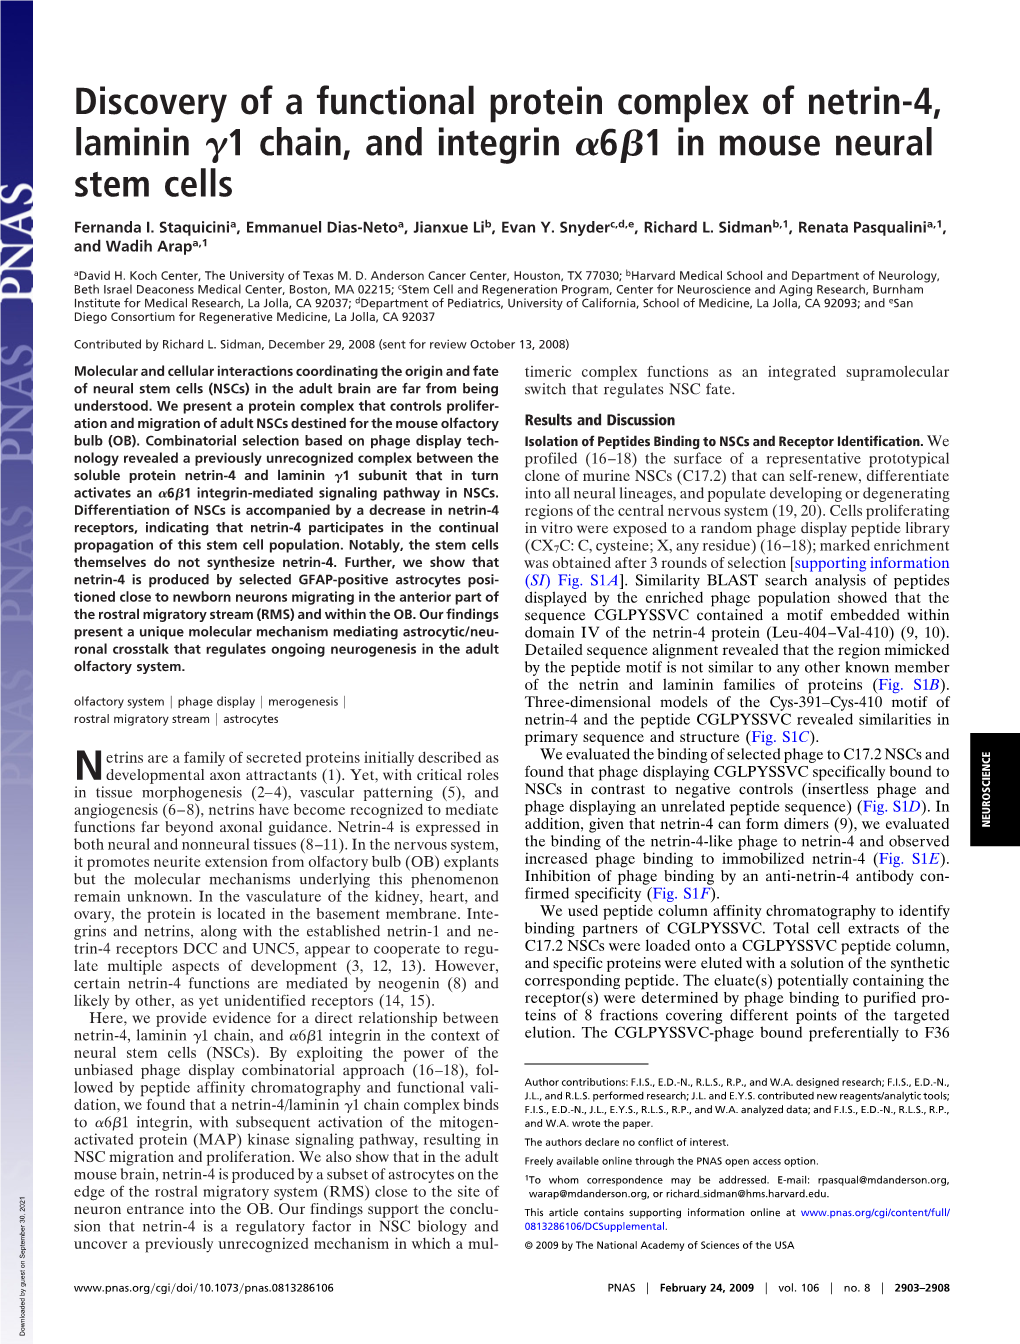 Discovery of a Functional Protein Complex of Netrin-4, Laminin 1 Chain, and Integrin 6 1 in Mouse Neural Stem Cells